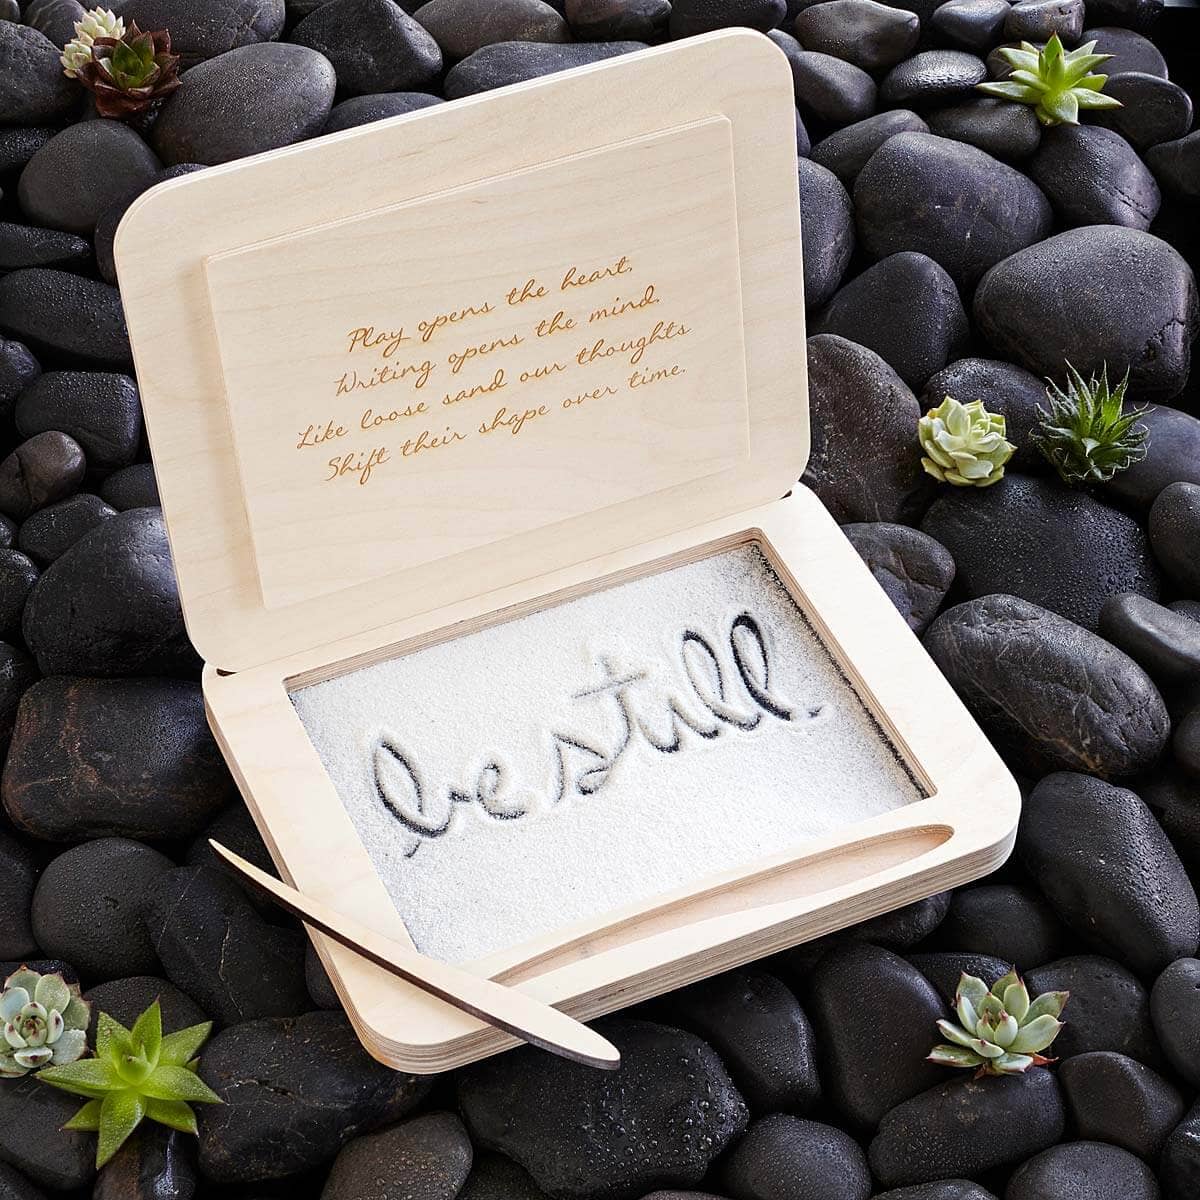 Soothe and Relax with This Meditation Box 